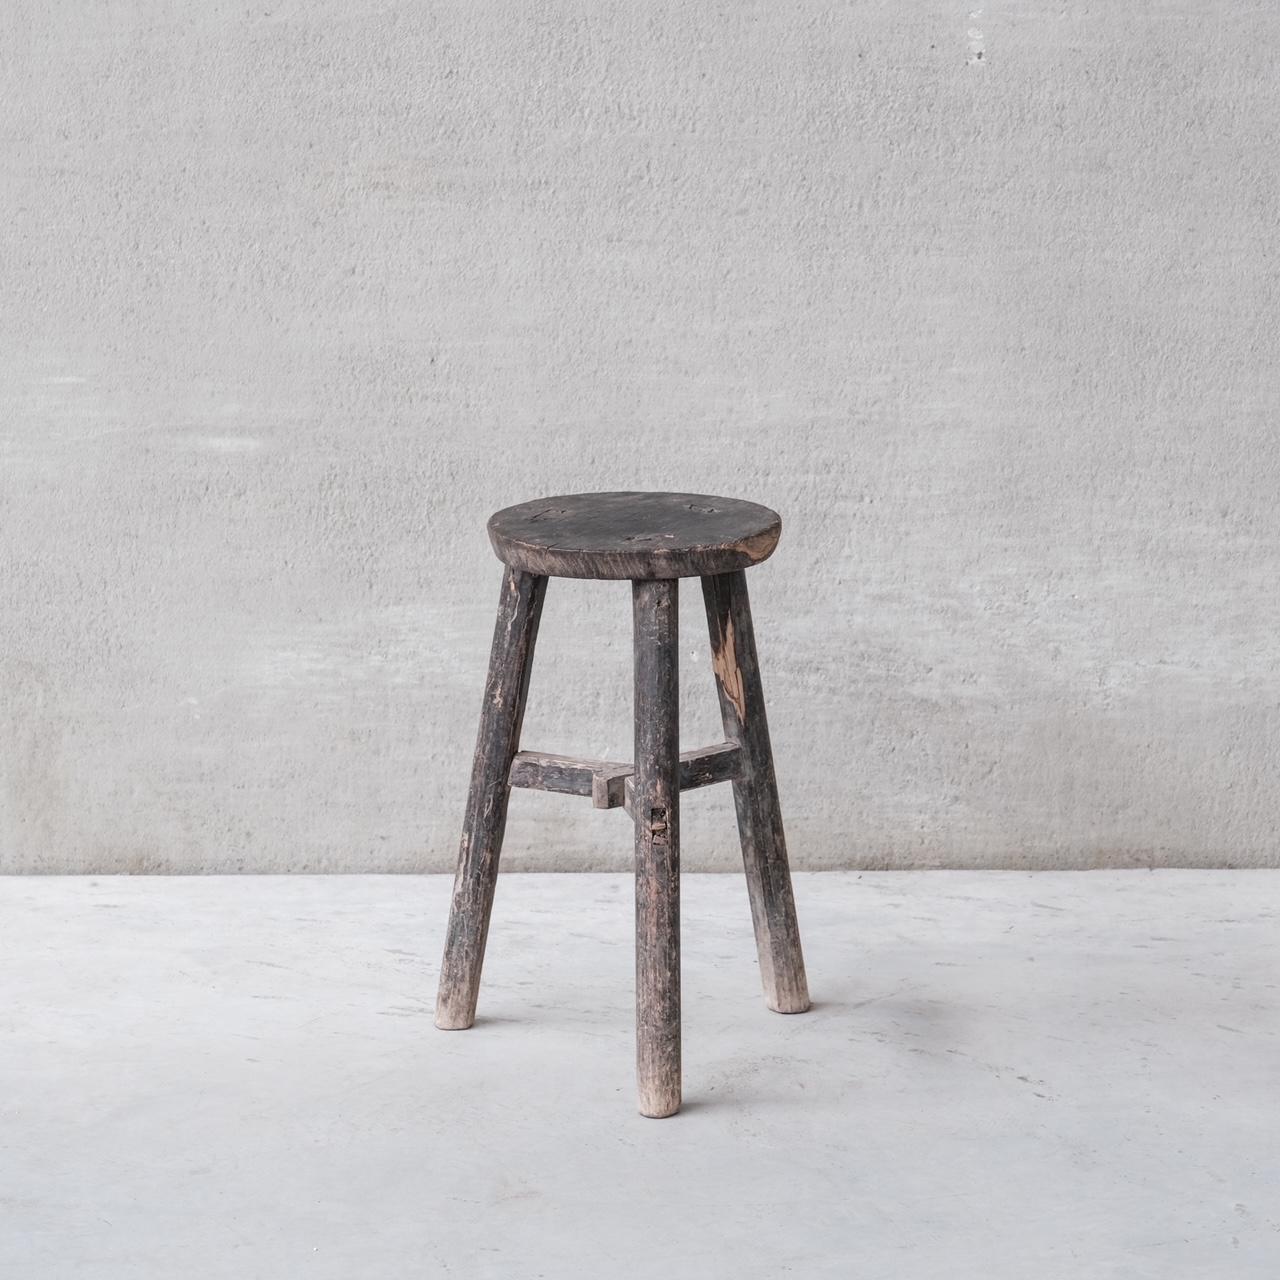 An antique side table or stool of primtive form. 

France, c1930s. 

Stained wood likely pine. 

Age, scuffs and wear commensurate with age, but this stool gives a lovely primitive wabi-sabi esque appeal. 

Location: Belgium Gallery.